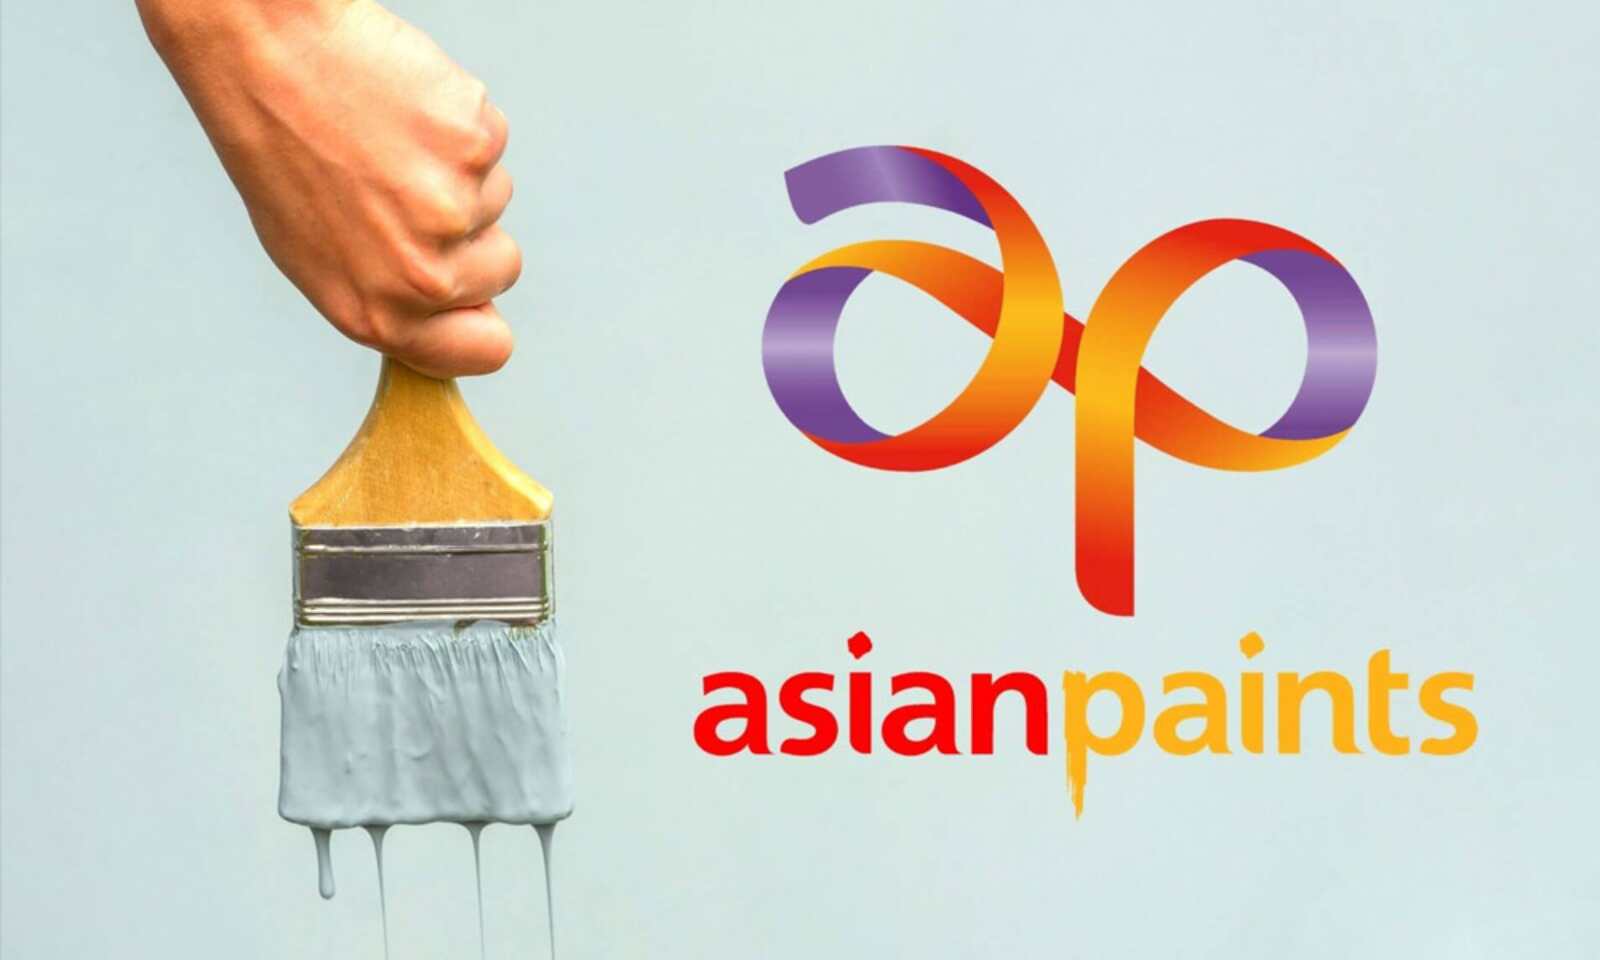 Asian Paints Q1FY23 Earnings: Consolidated Profit Jumps 80% YoY To Rs 1,036 crore, Revenue Sees Over 50% Increase To 8,607 crore